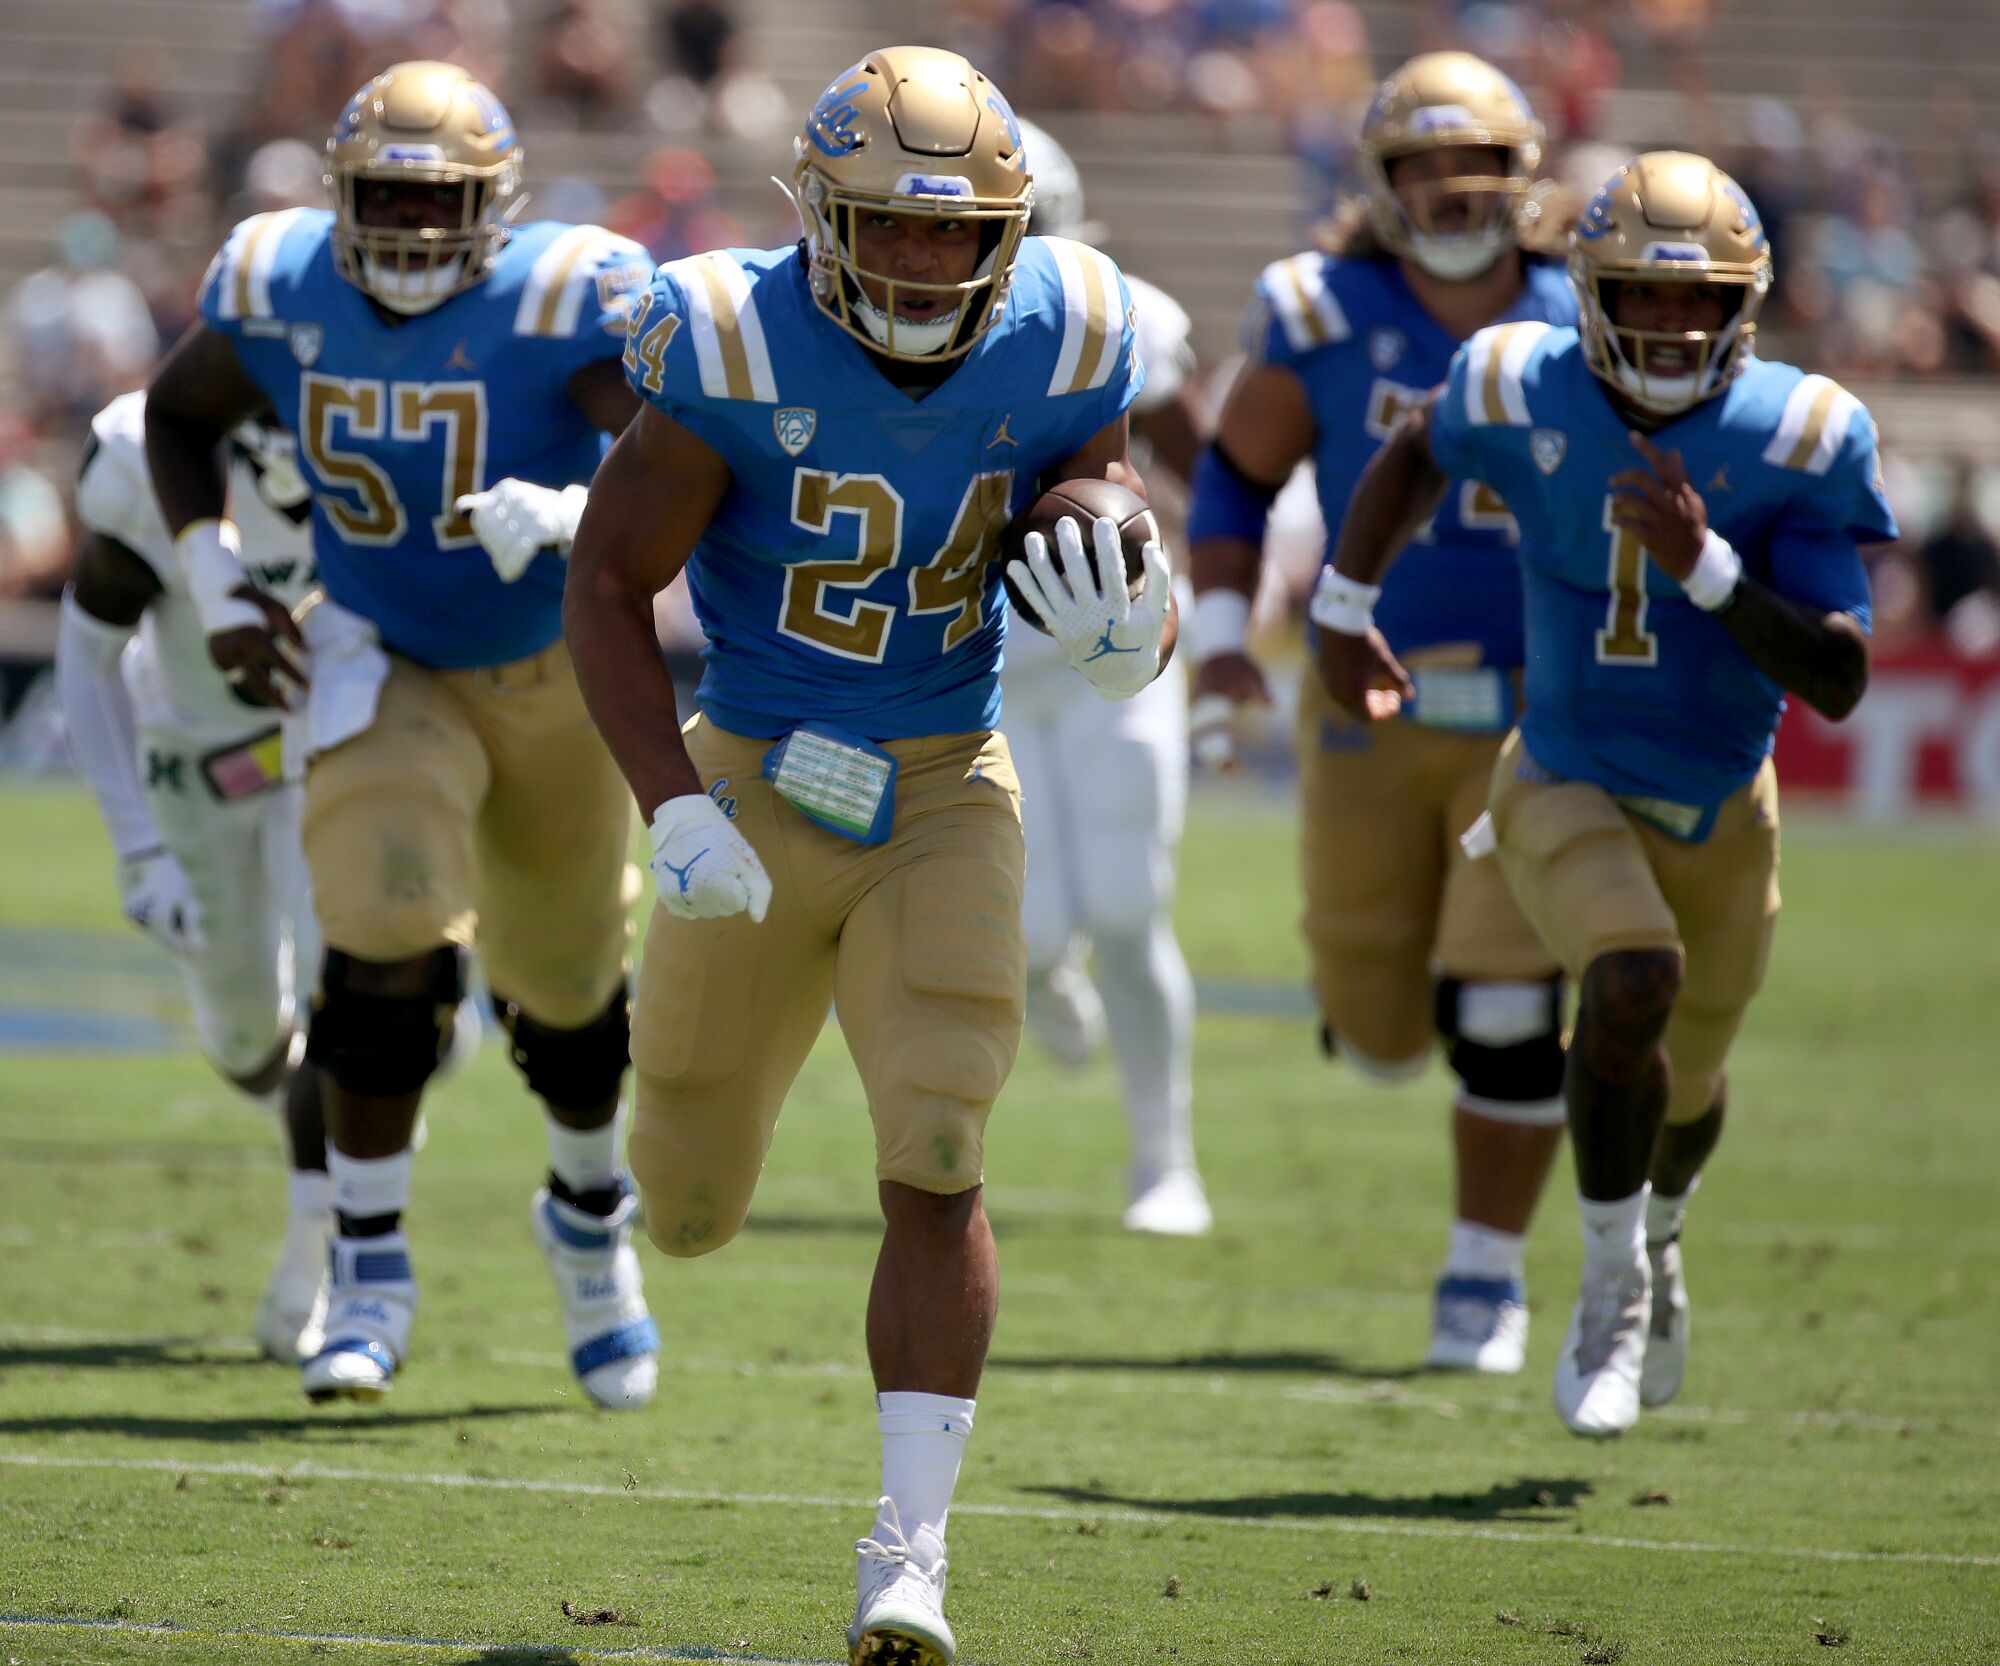 UCLA running back Zach Charbonnet breaks free for a touchdown run against Hawaii in the first quarter.